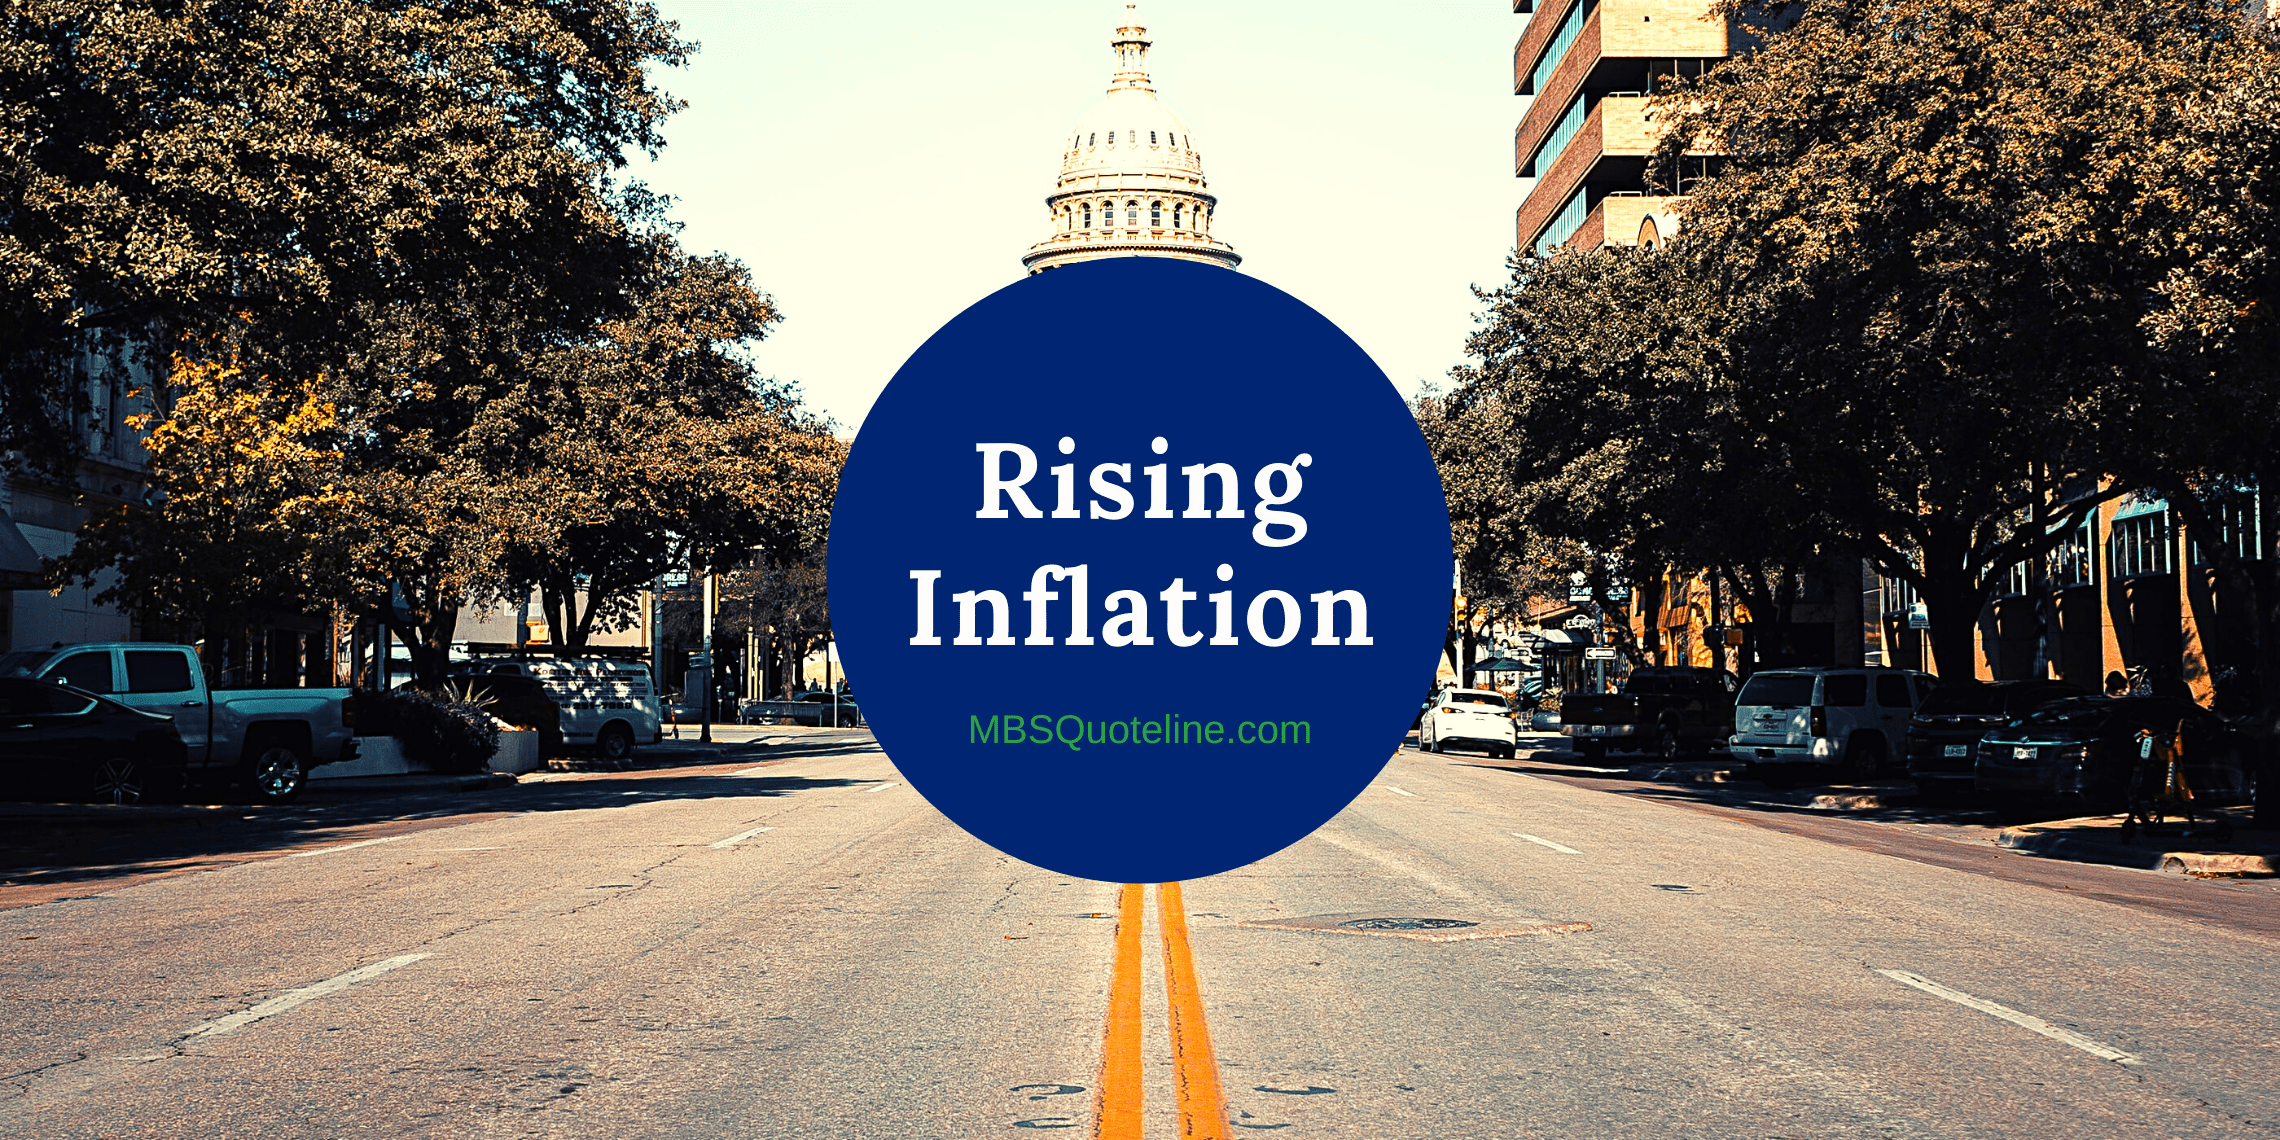 rising inflation mbsquoteline mortgage-backed securities featured